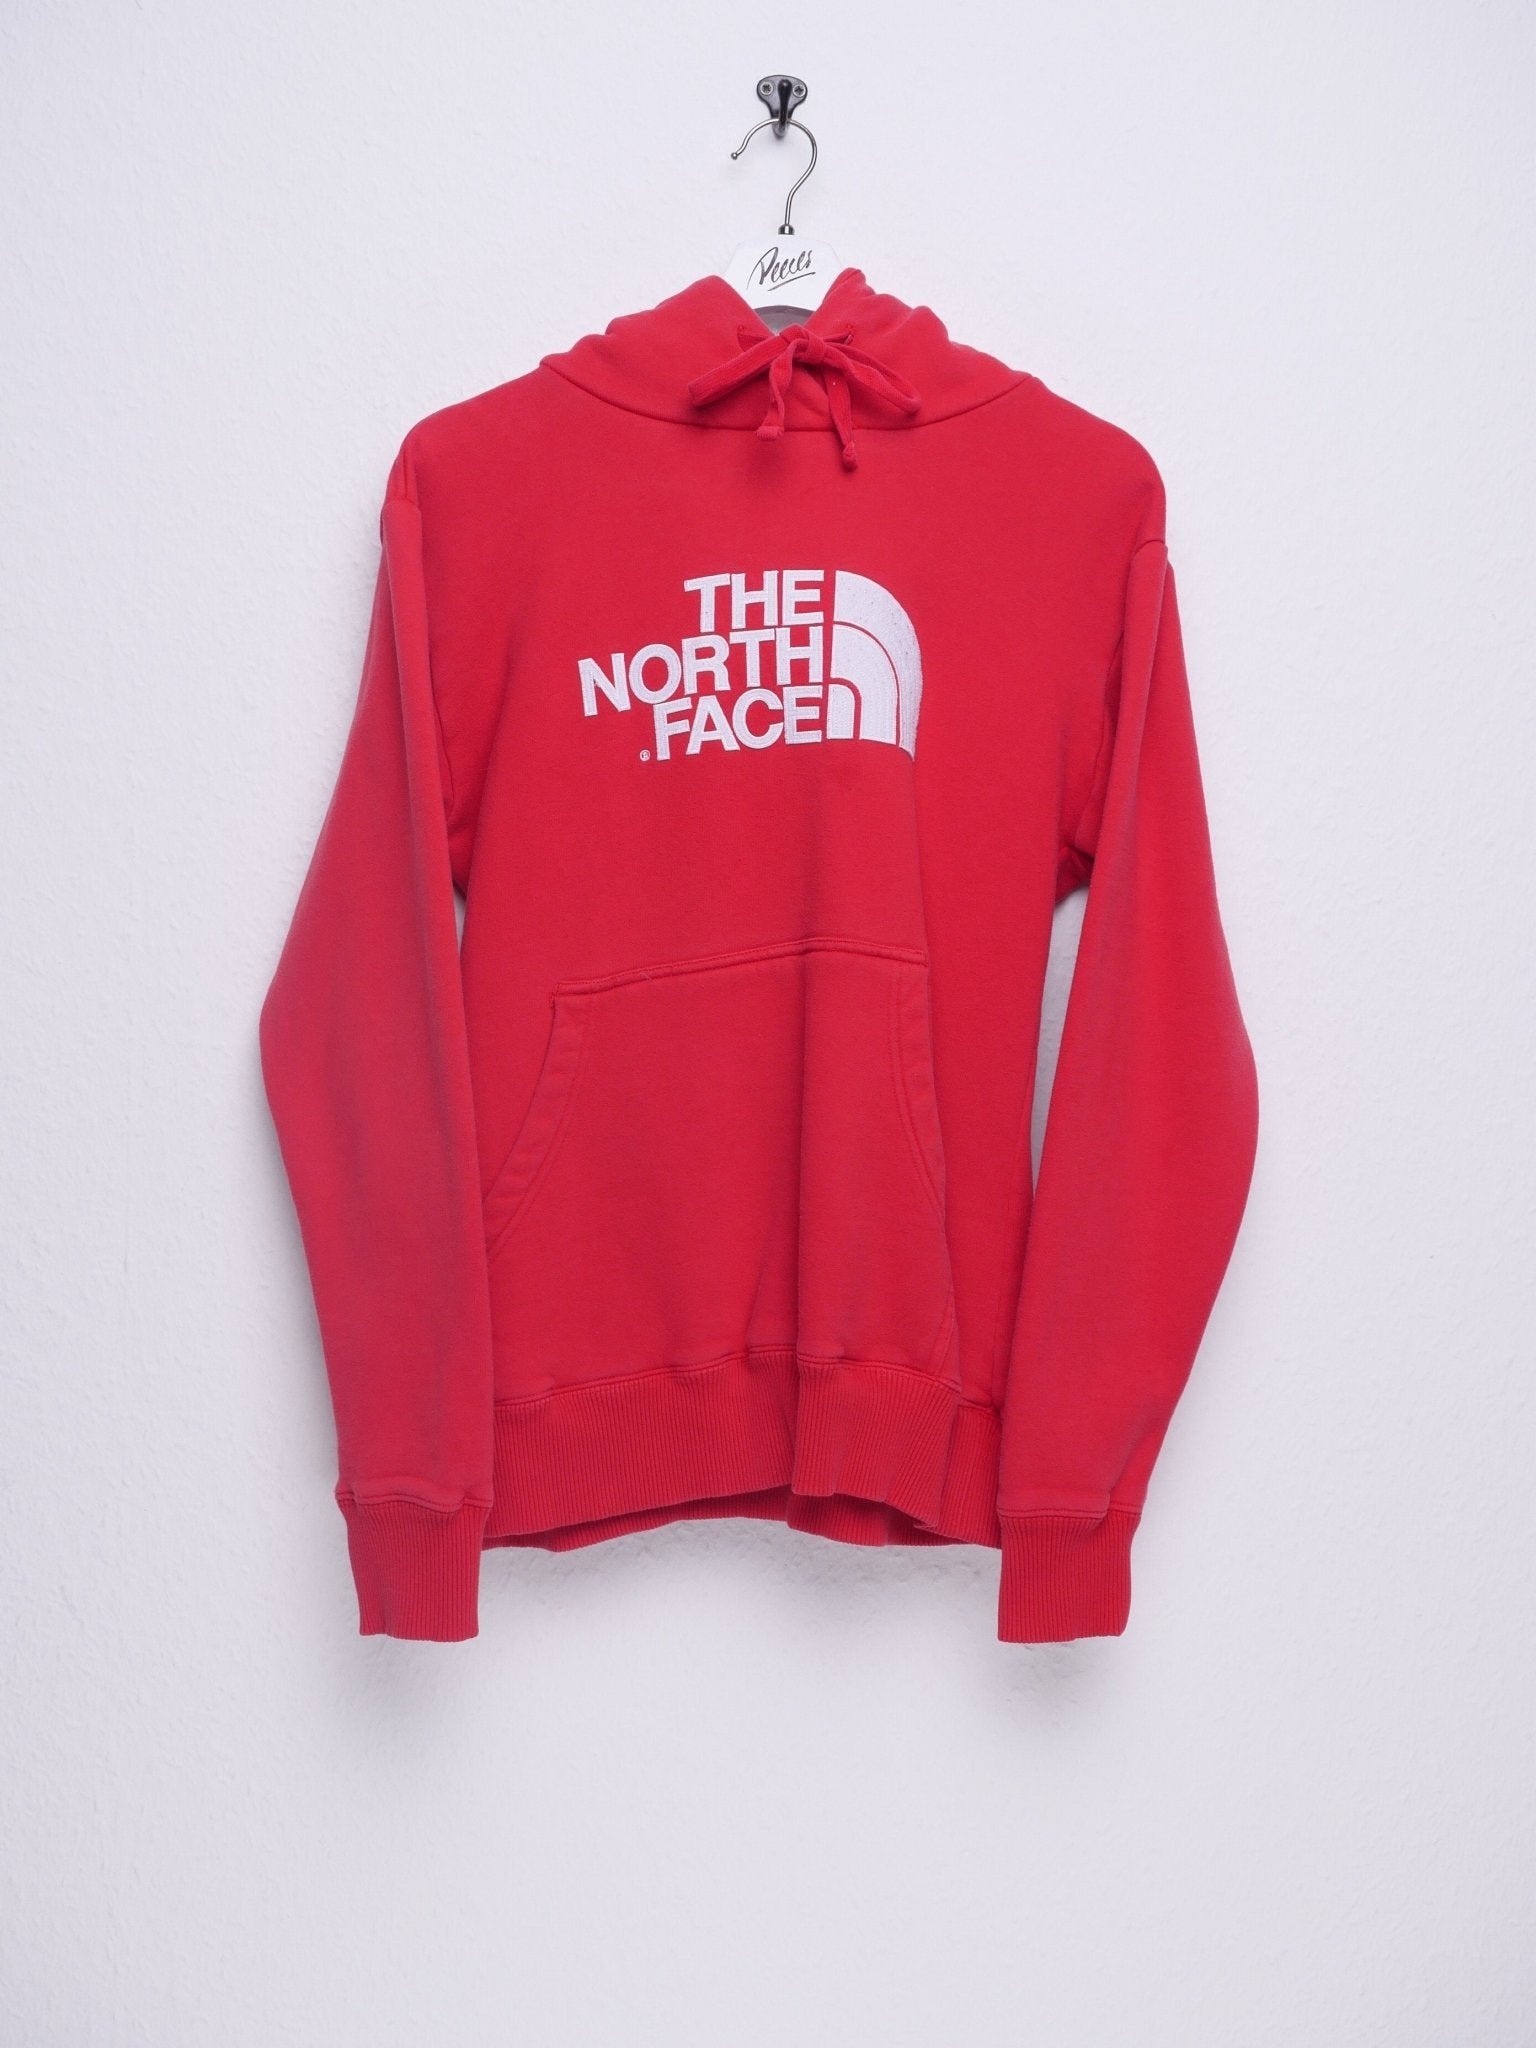 tnf embroidered Logo red Hoodie - Peeces